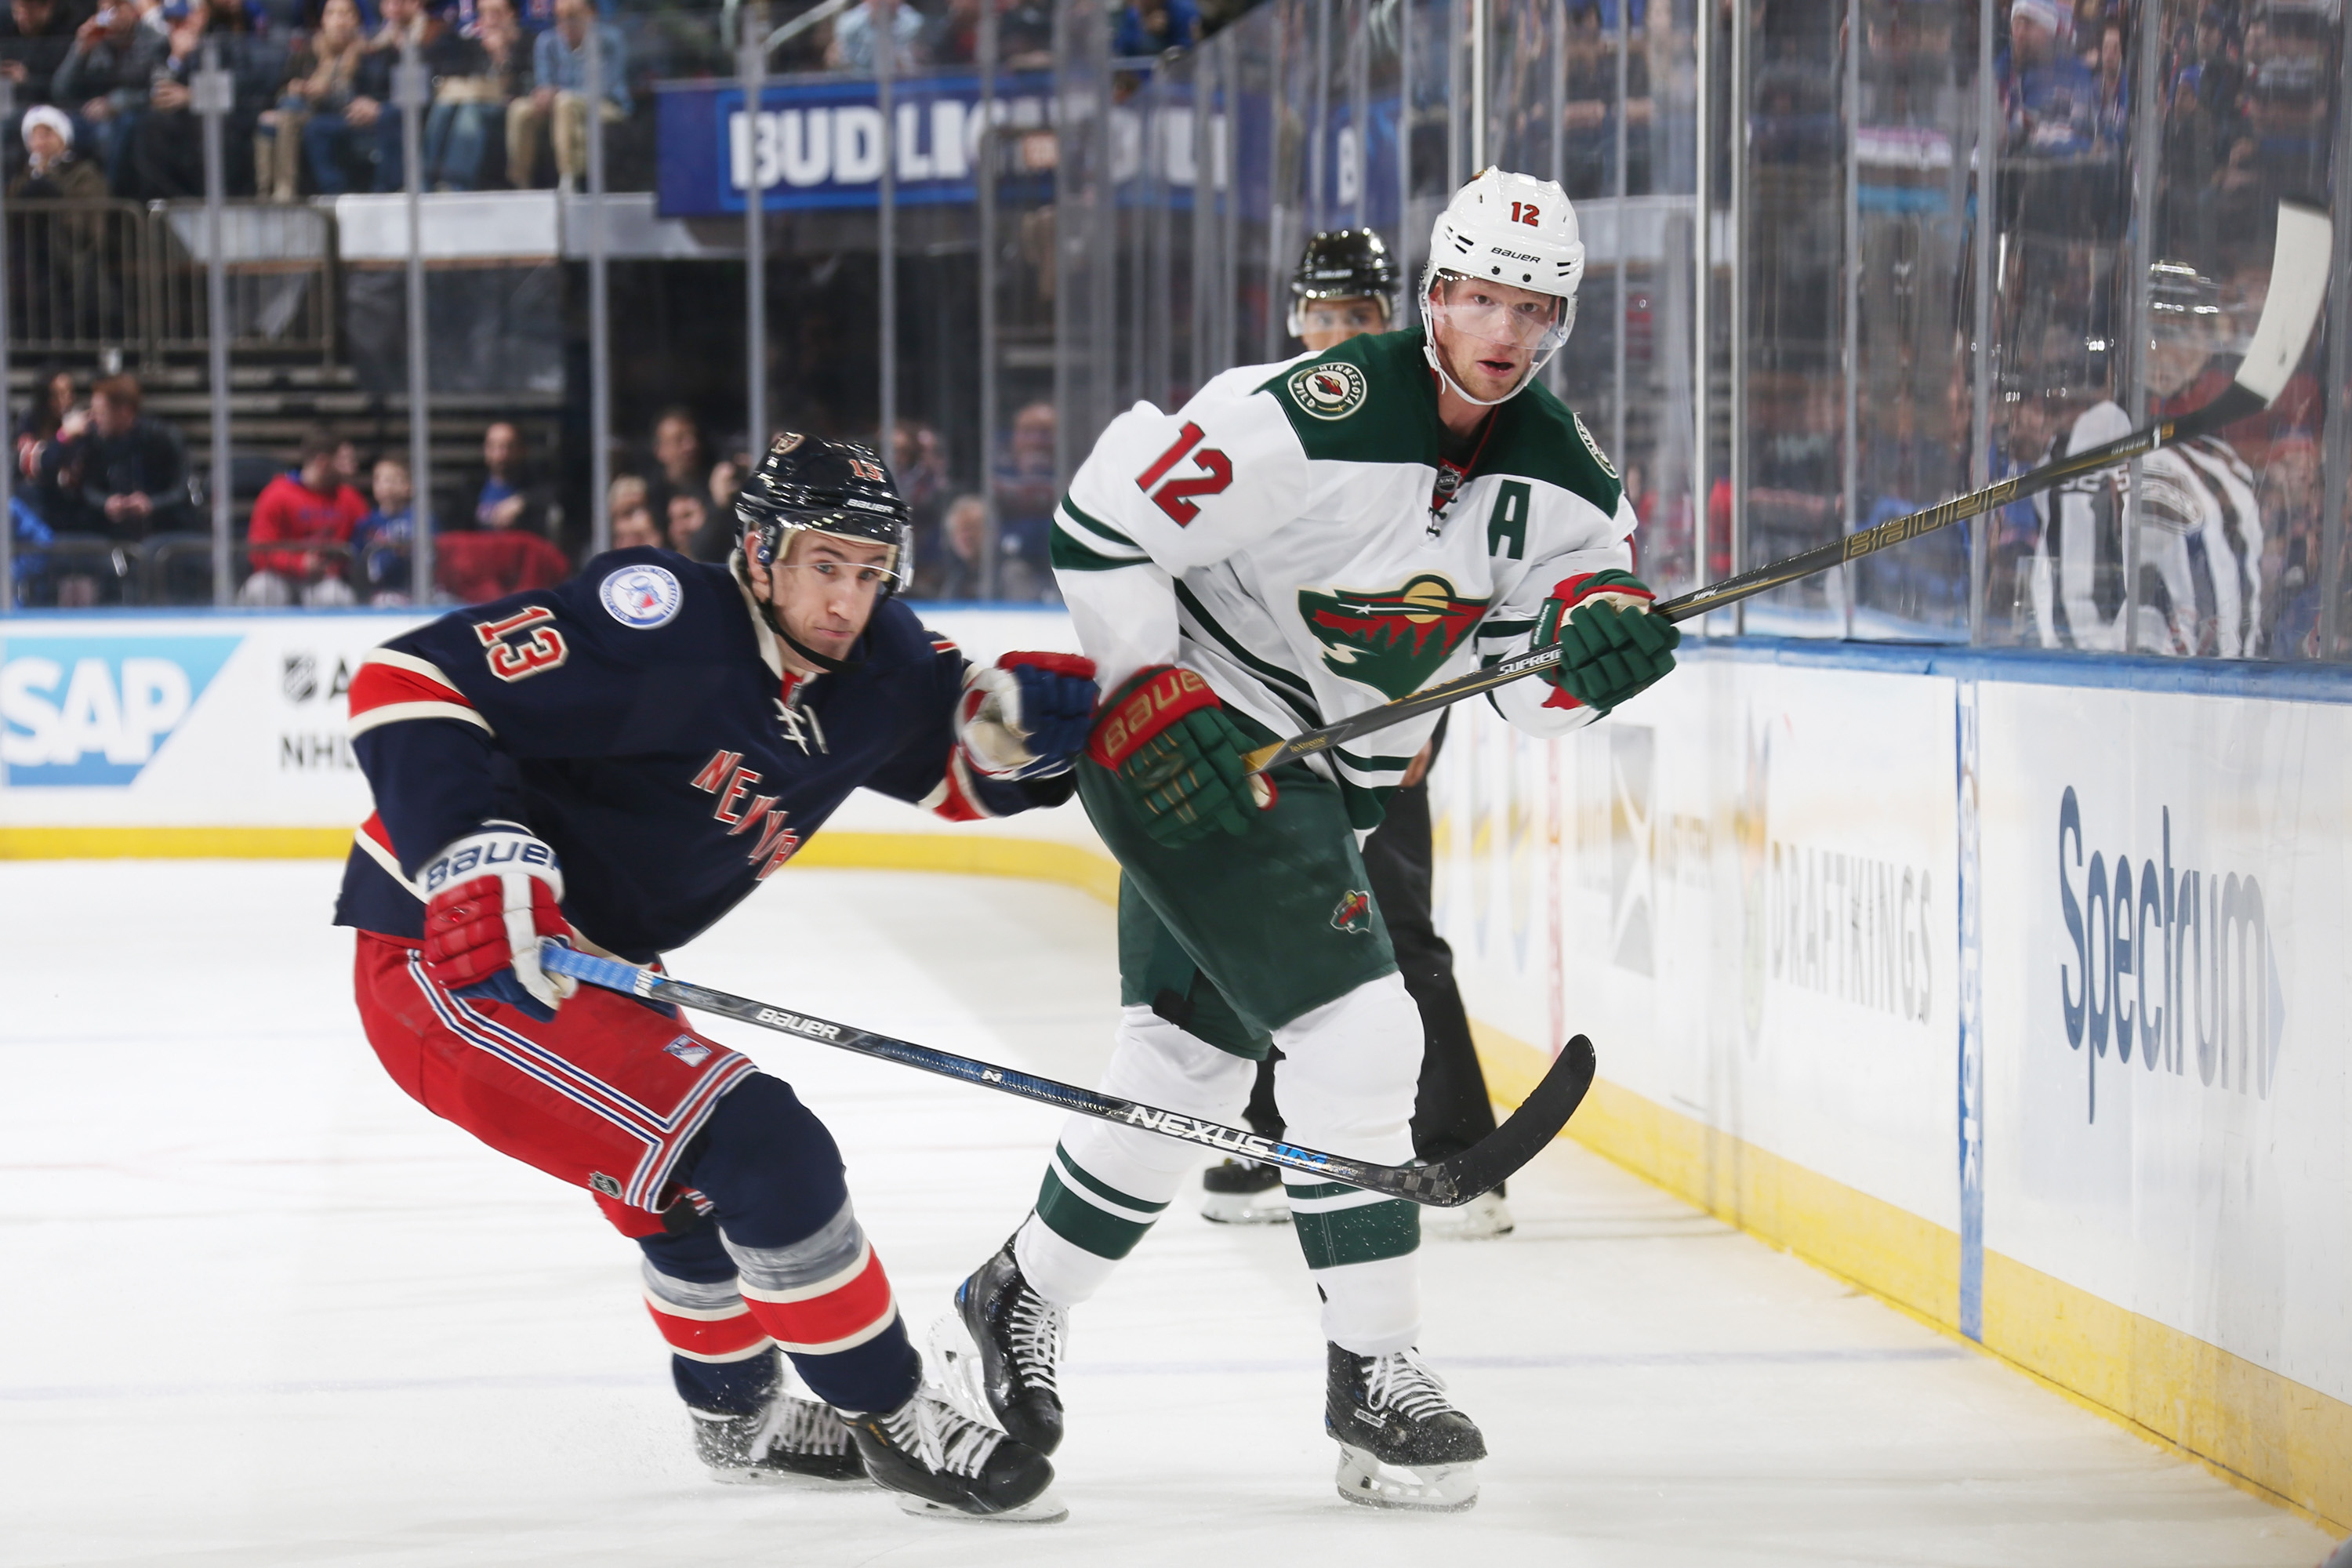 NEW YORK, NY - DECEMBER 23: Eric Staal #12 of the Minnesota Wild skates against Kevin Hayes #13 of the New York Rangers at Madison Square Garden on December 23, 2016 in New York City. The Minnesota Wild won 7-4. (Photo by Jared Silber/NHLI via Getty Images)